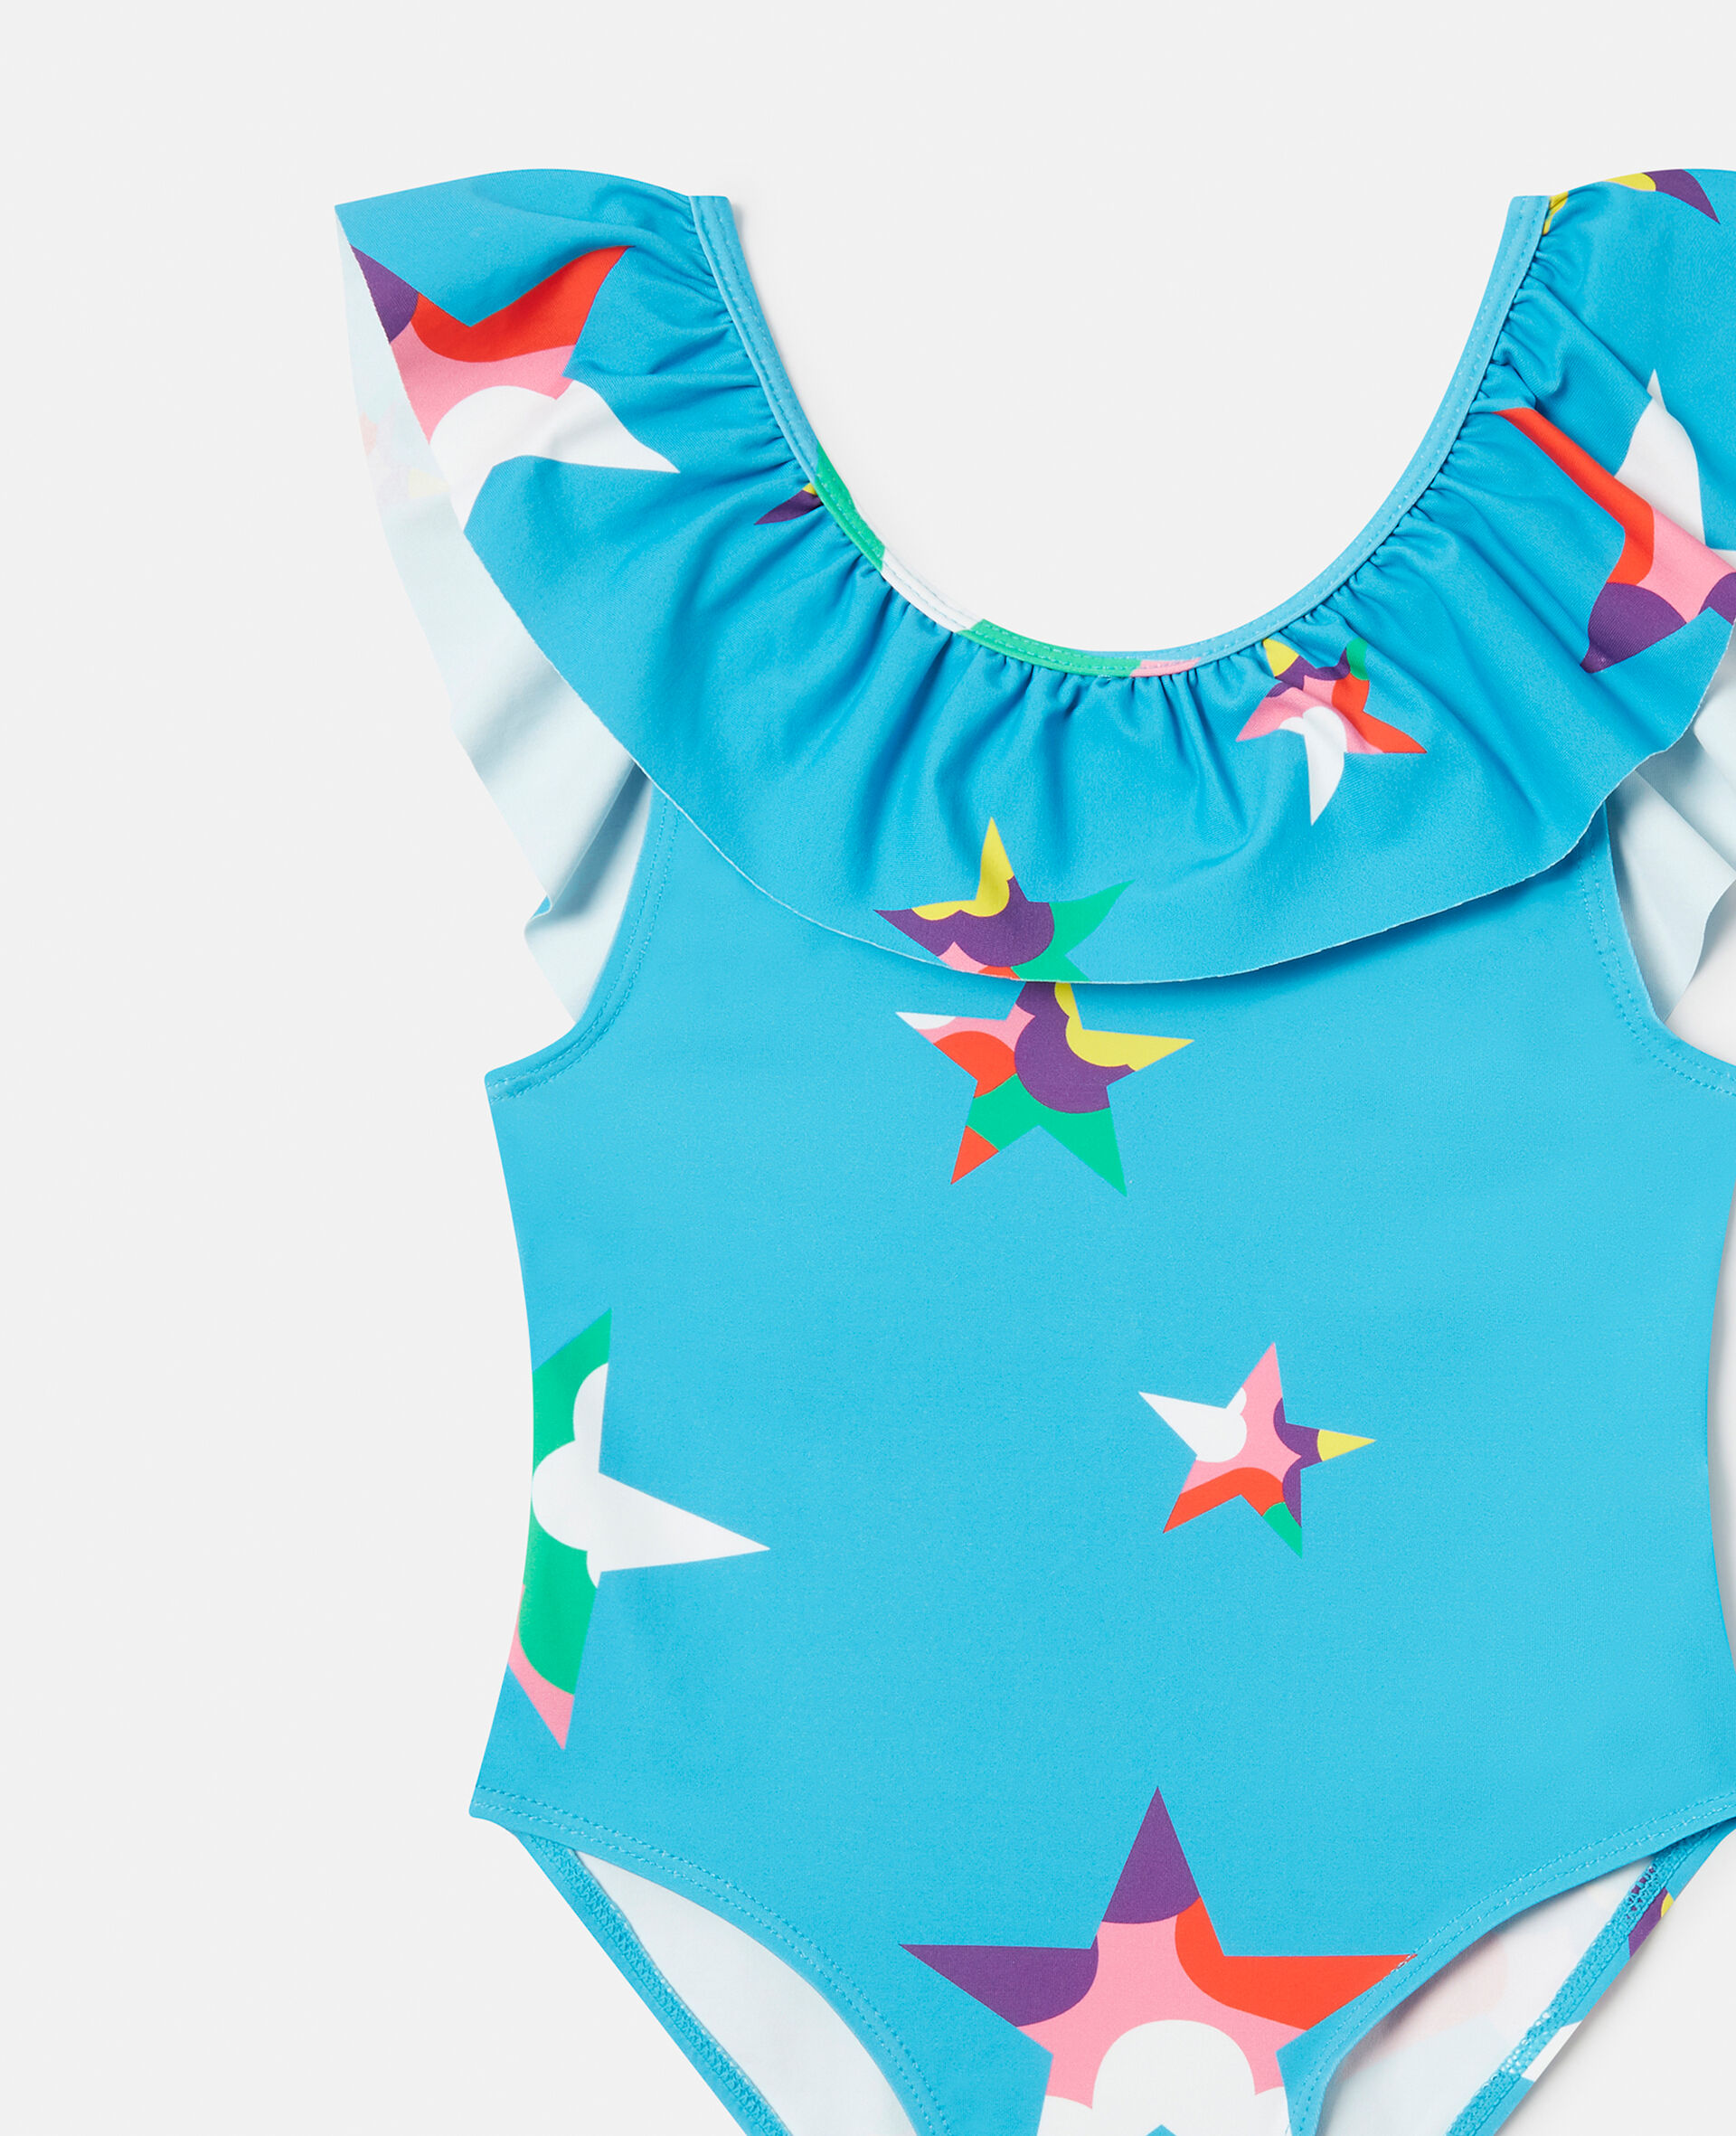 Star Print Ruffle Swimsuit-Multicolour-large image number 1